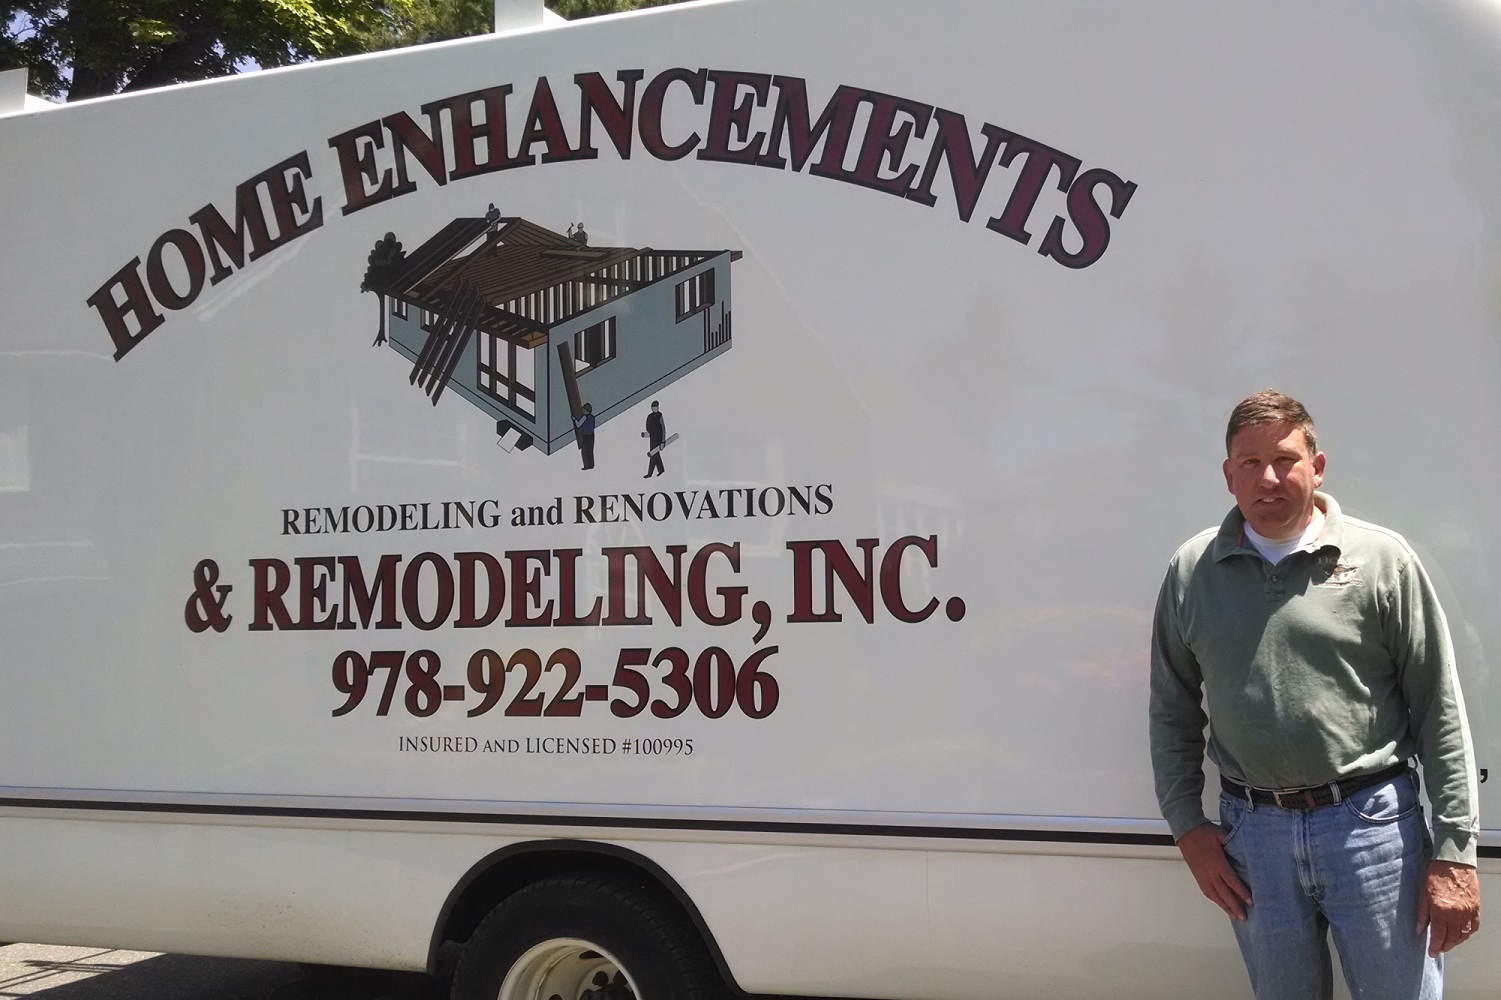 Home Enhancements and Remodeling